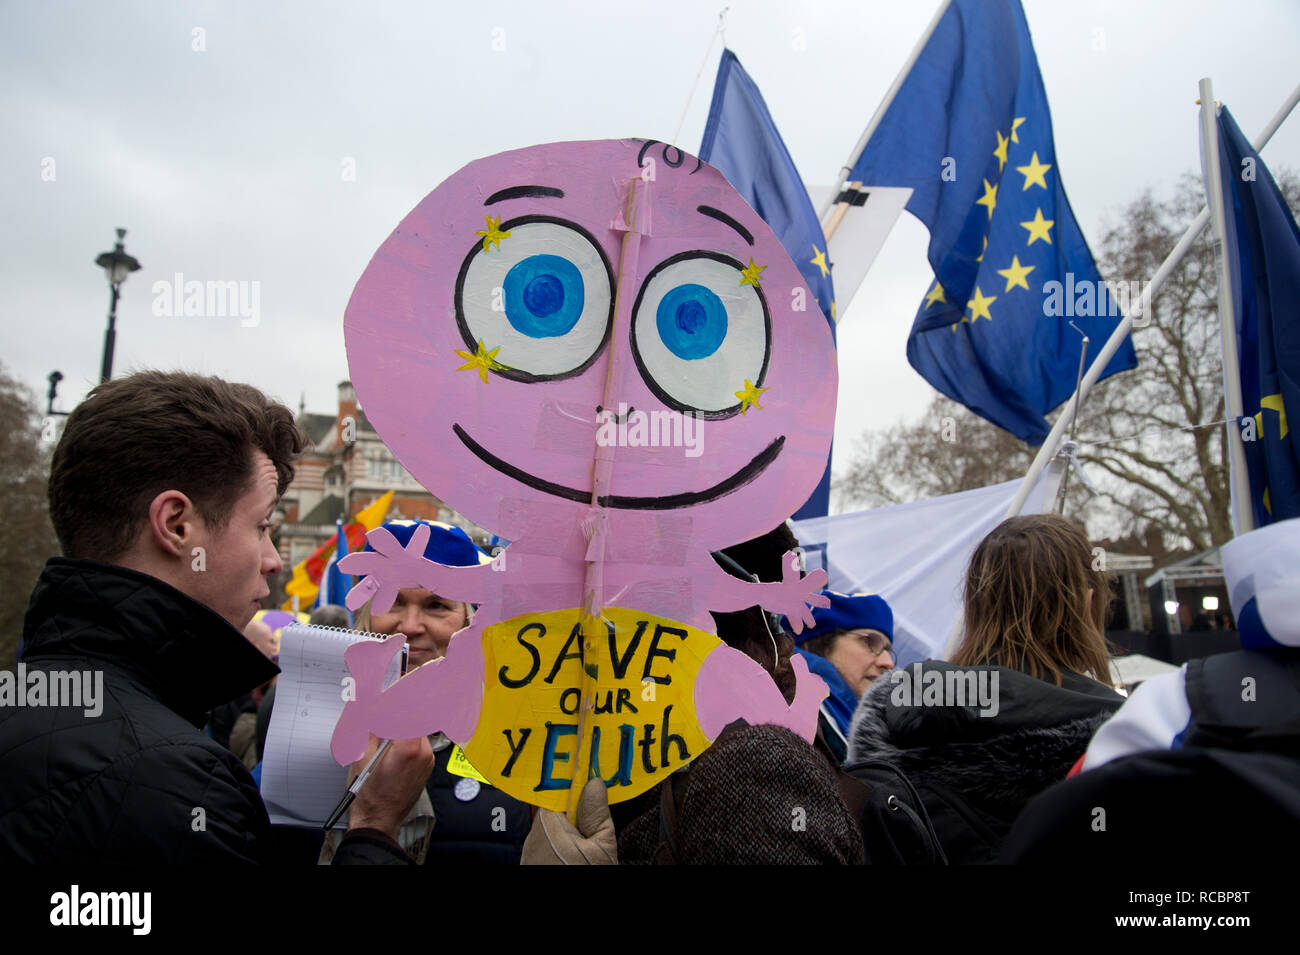 Westminster, London, UK. January 15th 2019. Demonstrations outside the Houses of Parliament as MPS vote on PM Theresa May's Brexit deal. A protester holds a cardboard cut-out in the shape of a baby Credit: Jenny Matthews/Alamy Live News Stock Photo